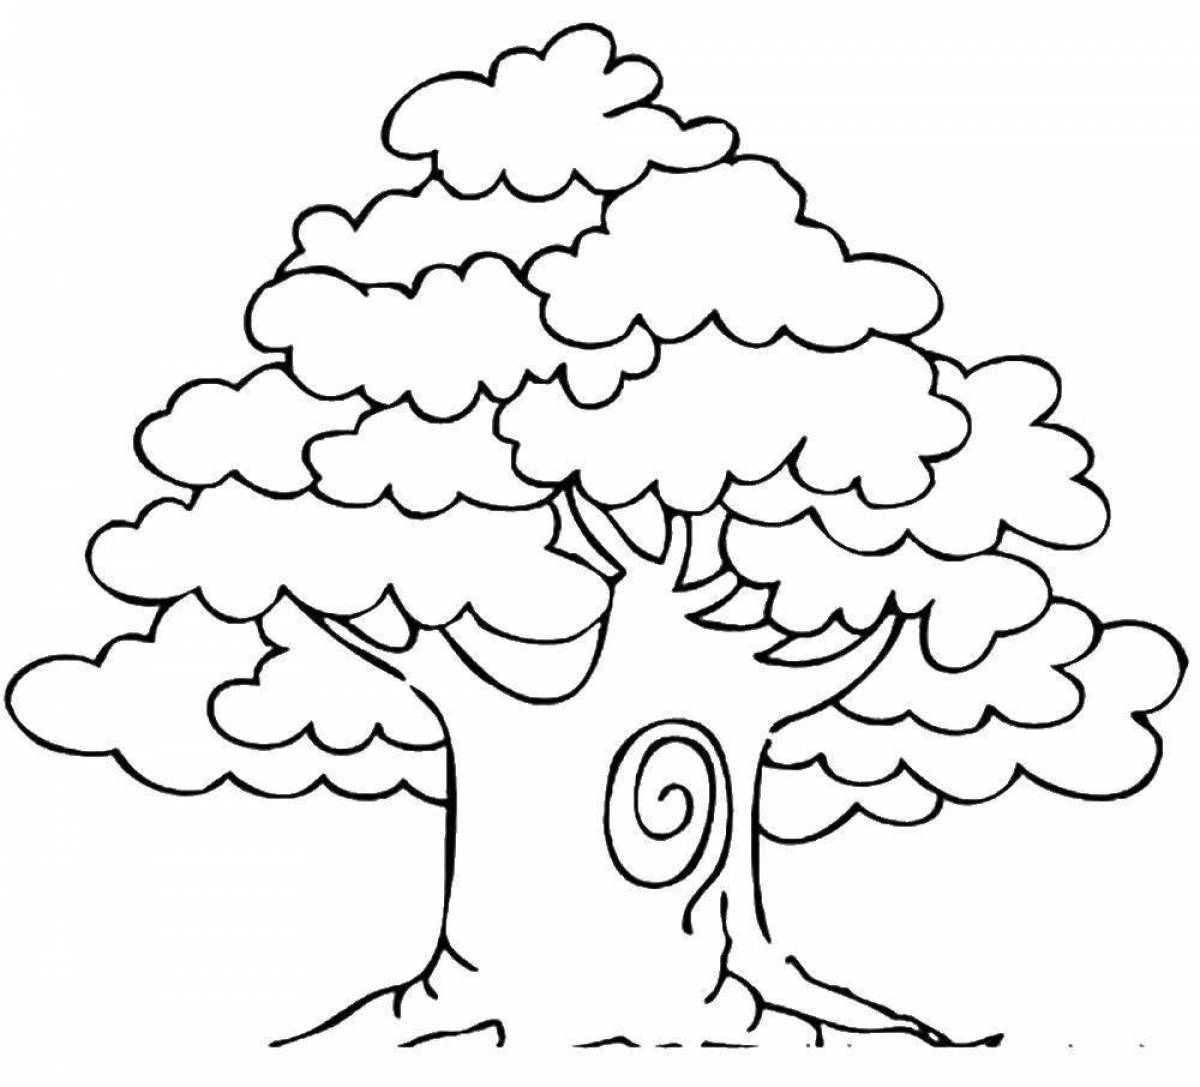 Incredible tree coloring book for kids